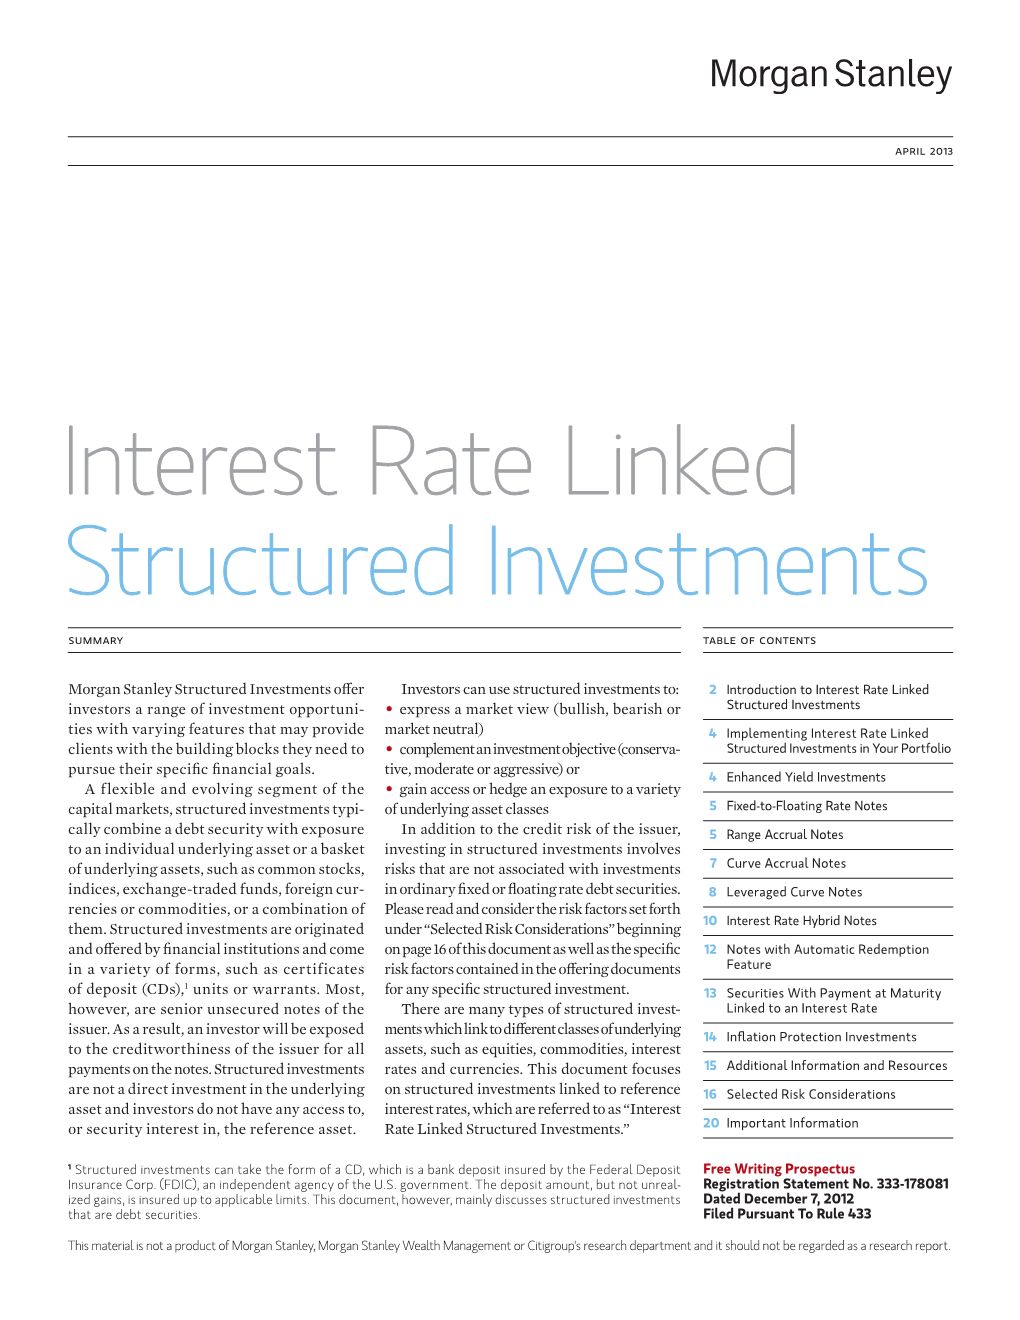 Interest Rate Linked Structured Investments